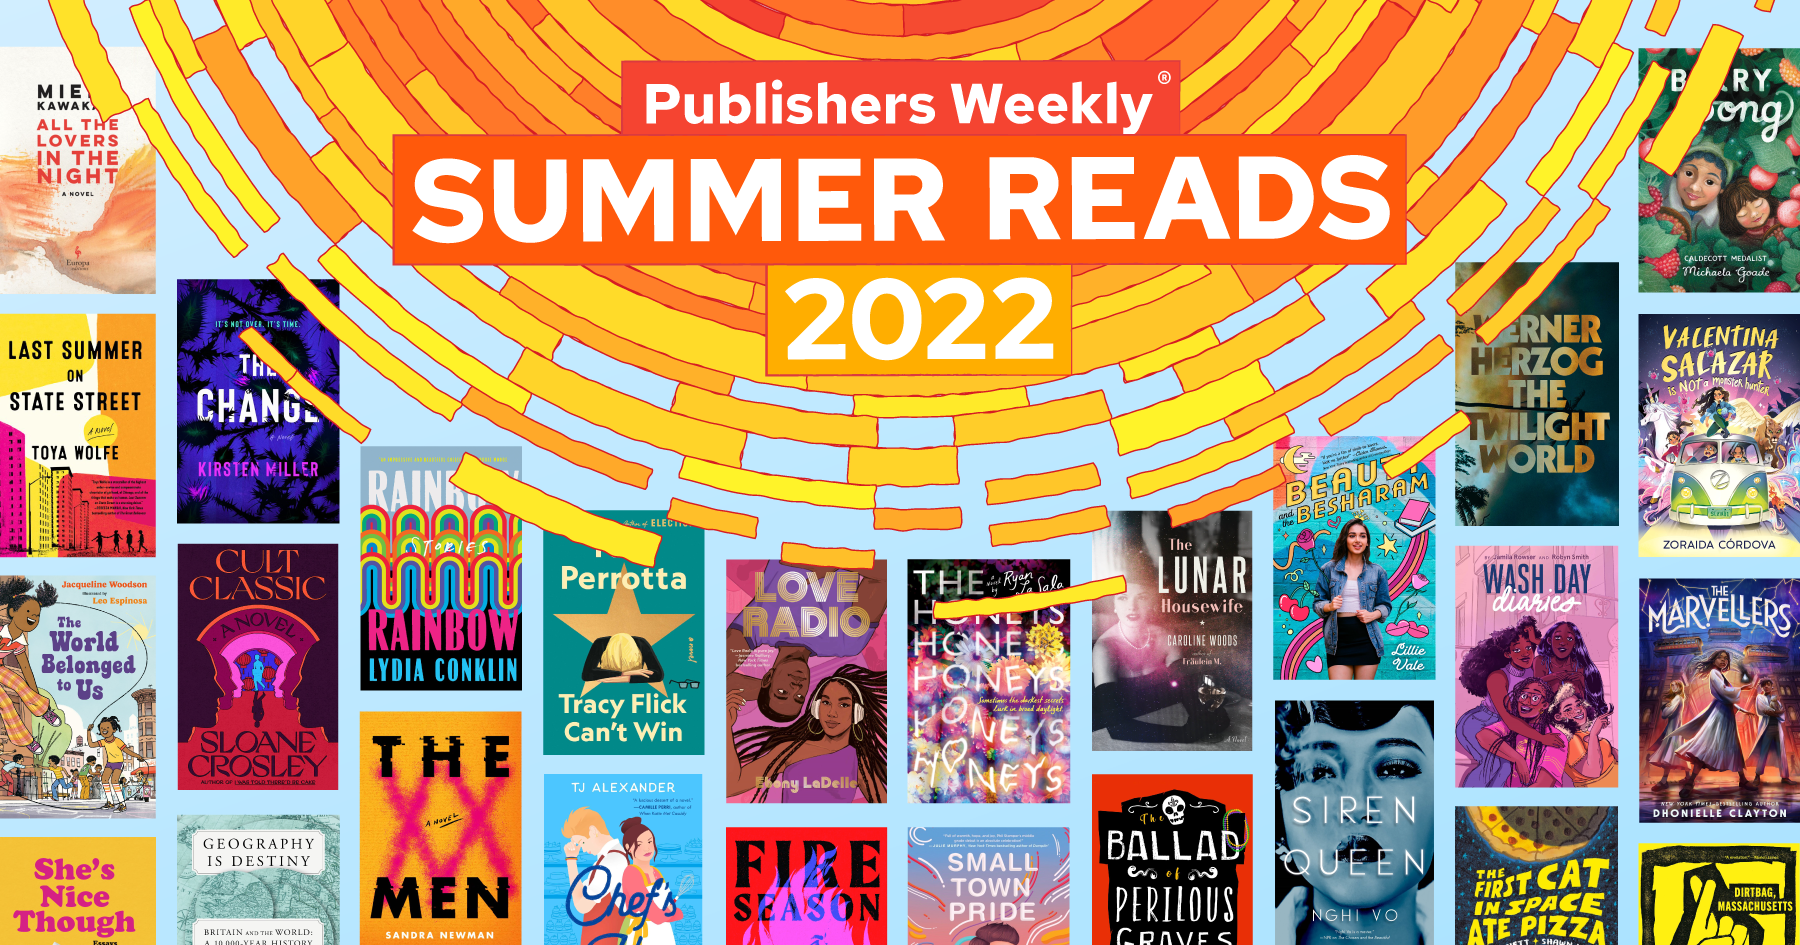 Summer Reads 2022 from Publishers Weekly Publishers Weekly